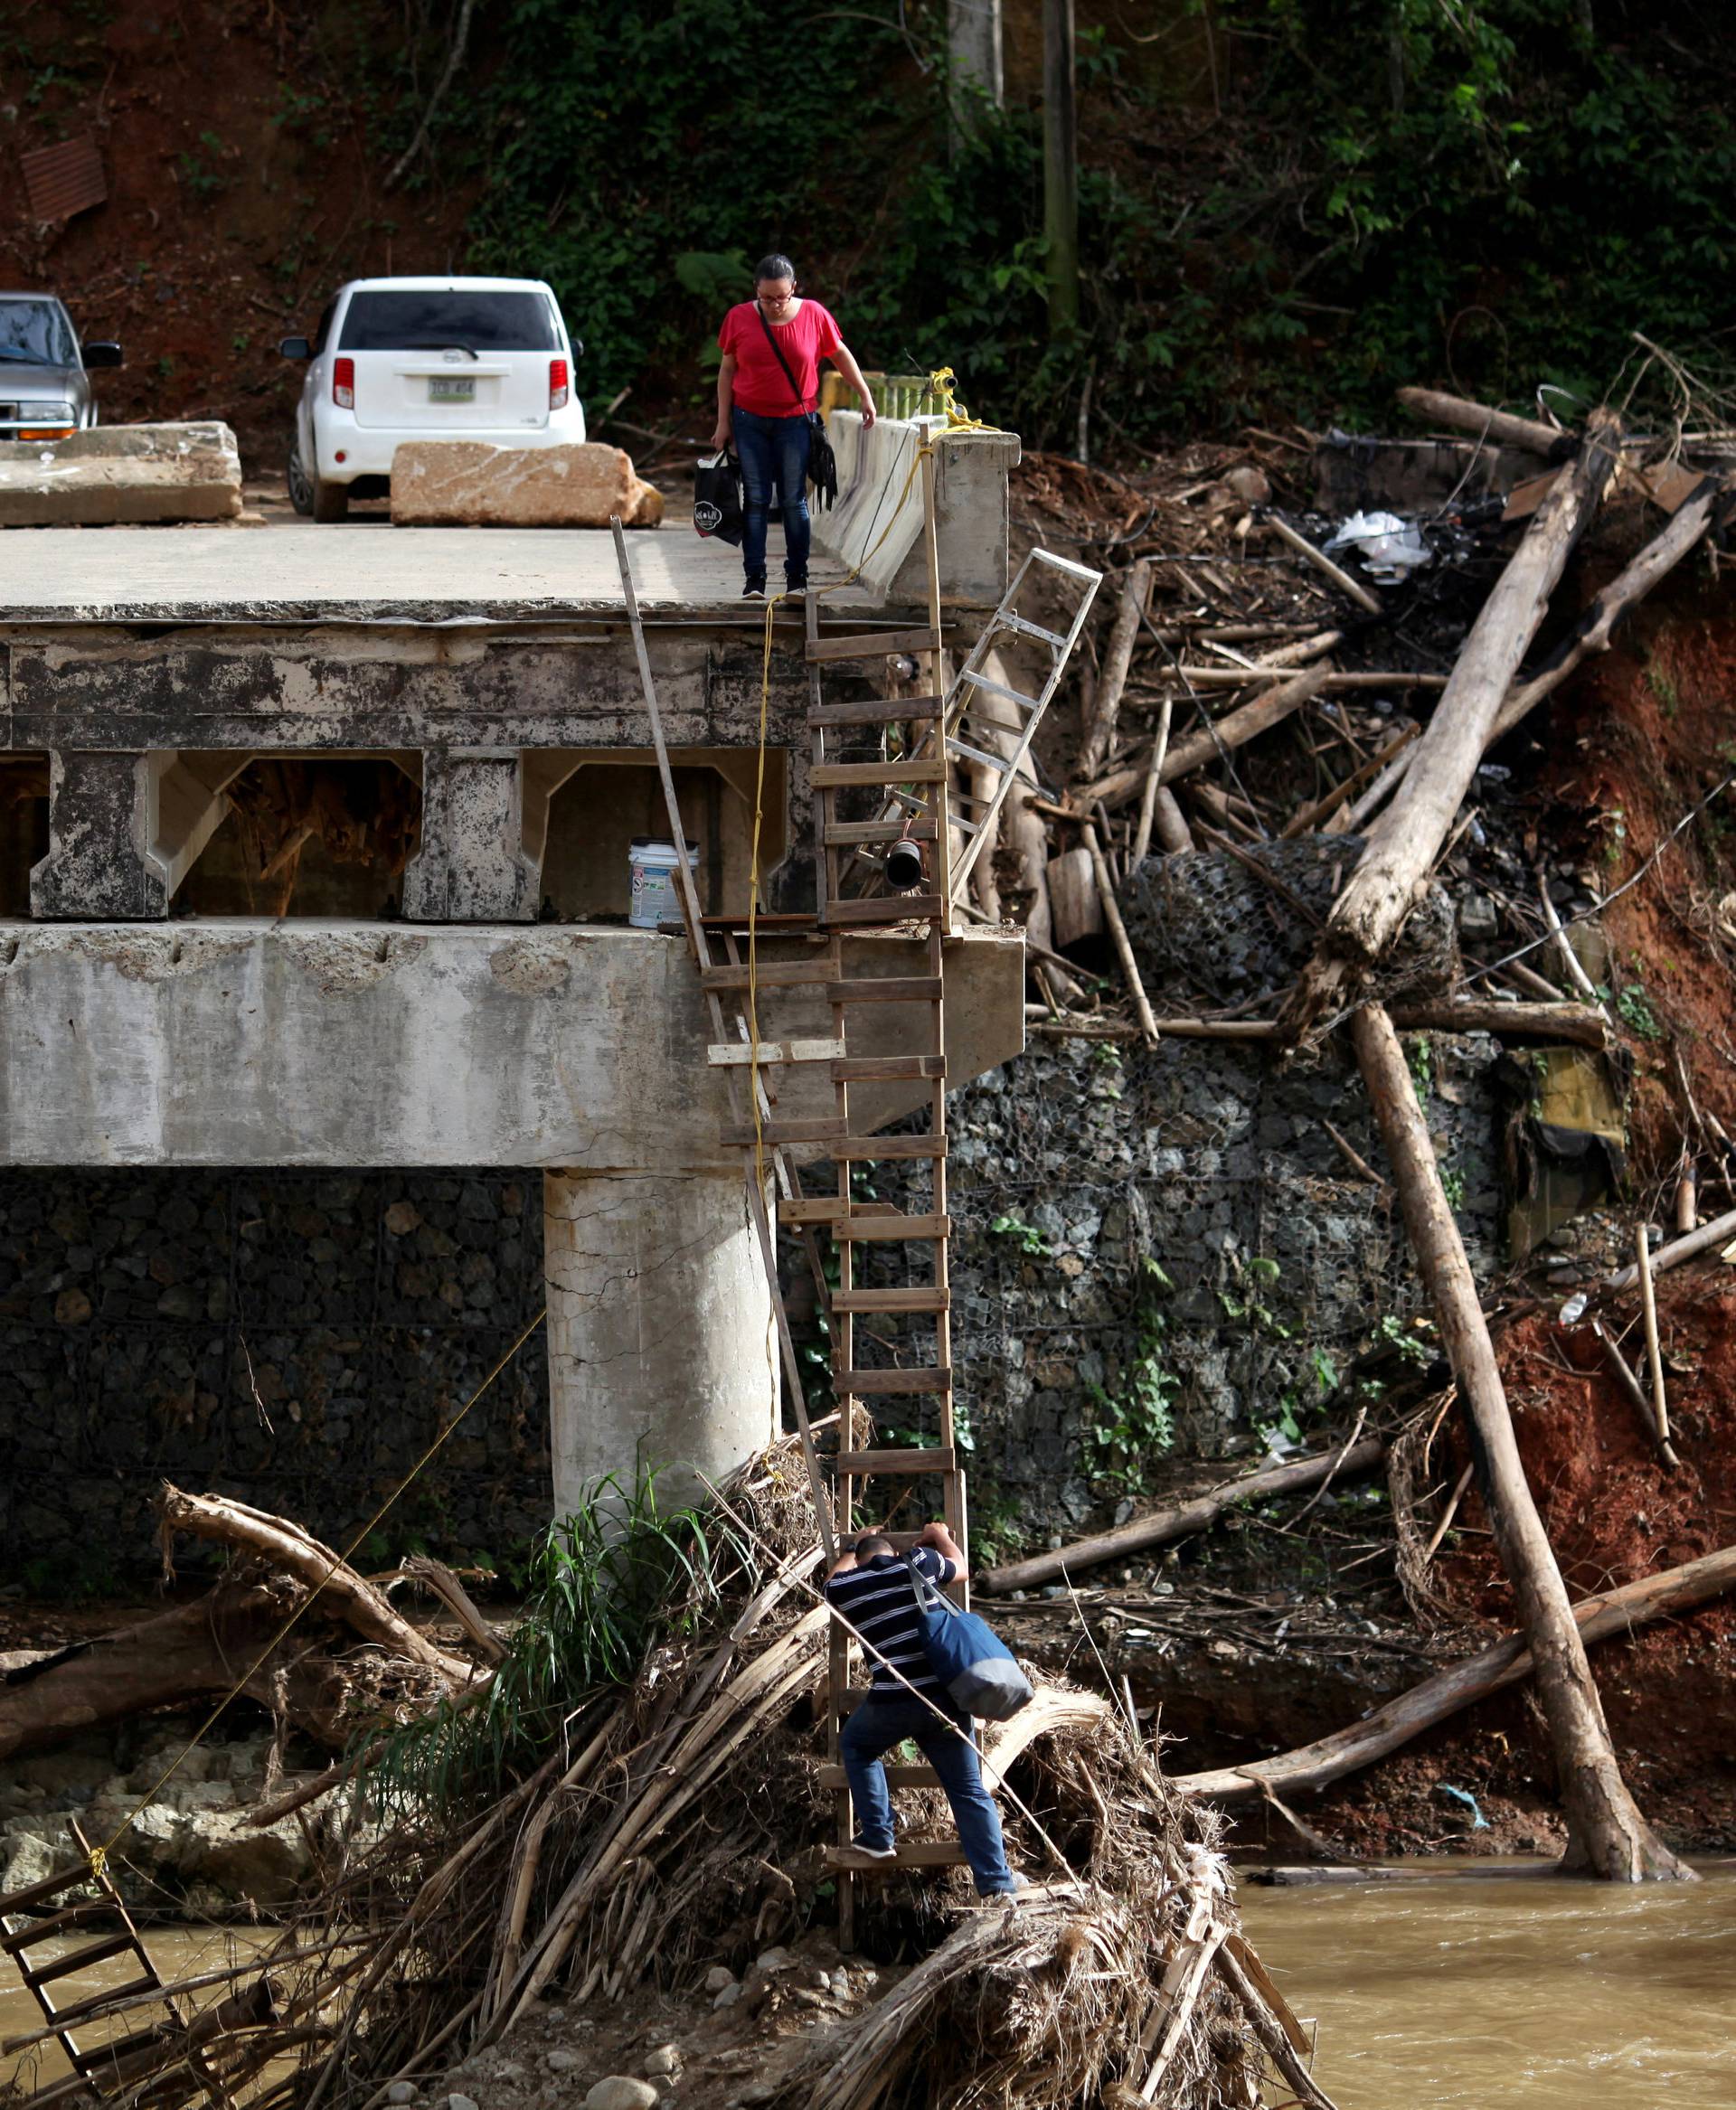 FILE PHOTO: A woman looks as her husband climbs down a ladder at a partially destroyed bridge, after Hurricane Maria hit the area in September, in Utuado